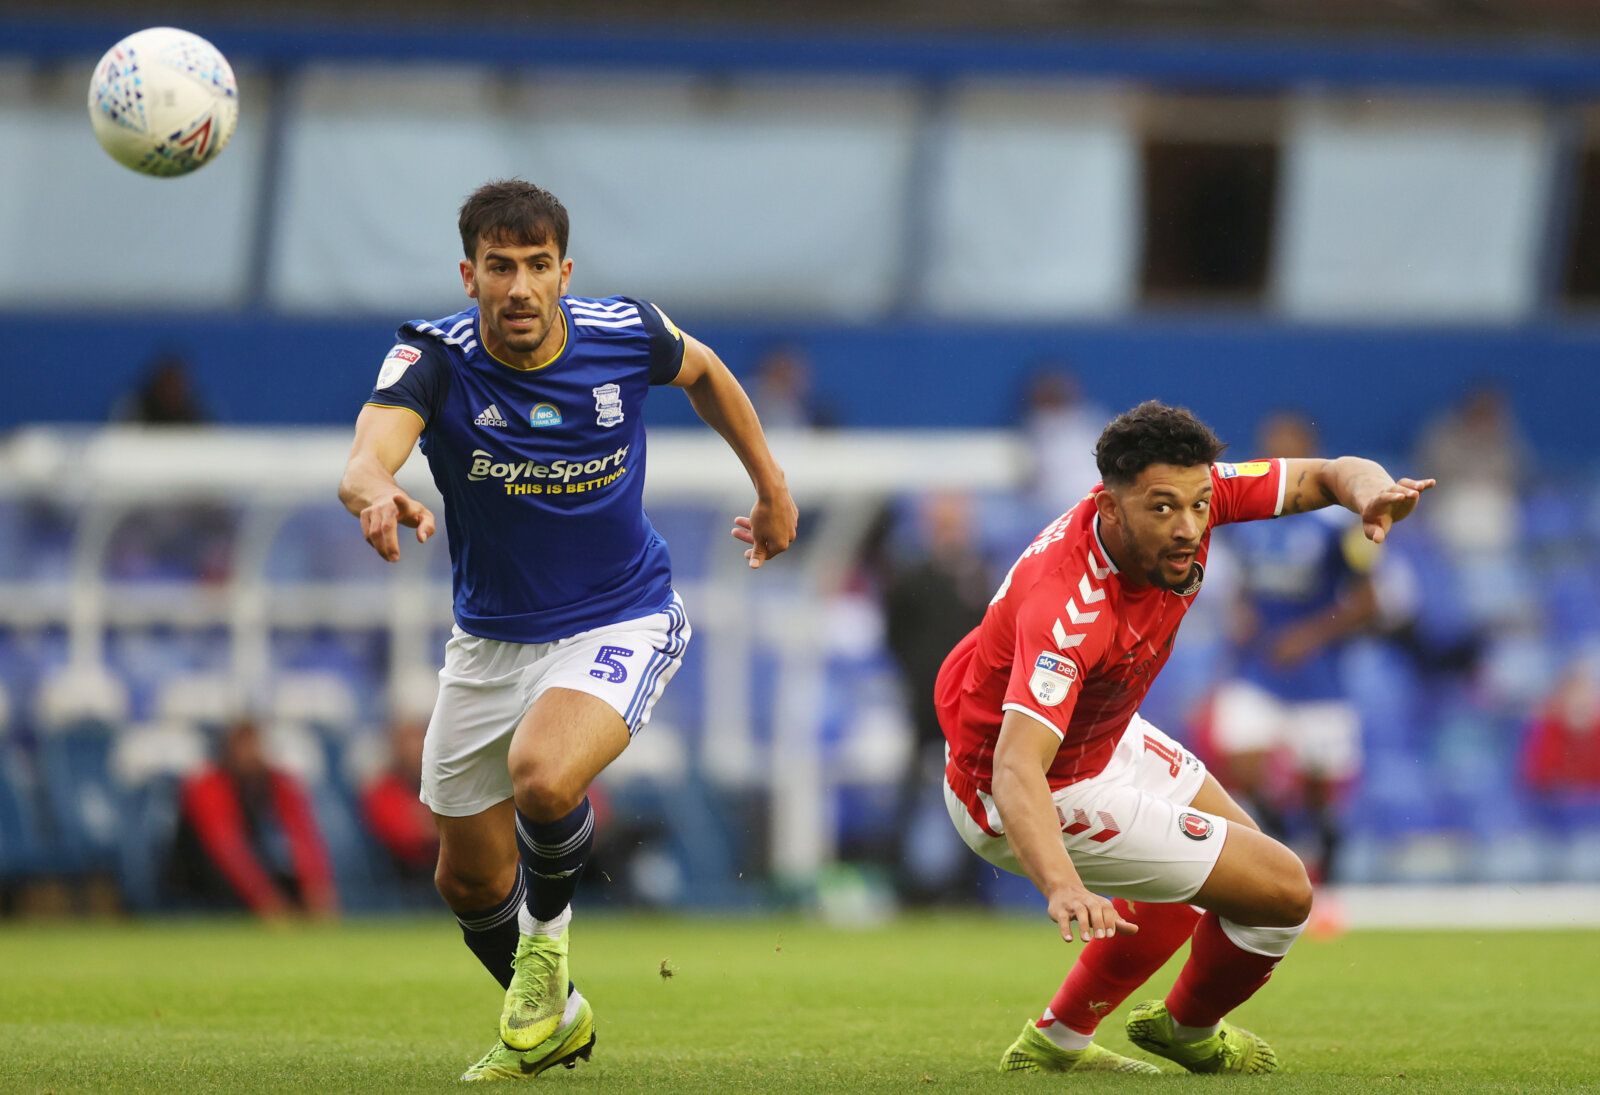 Soccer Football - Championship - Birmingham City v Charlton Athletic - St Andrew's, Birmingham, Britain - July 15, 2020  Birmingham City's Maxime Colin in action with Charlton Athletic's Macauley Bonne, as play resumes behind closed doors following the outbreak of the coronavirus disease (COVID-19)  Action Images/Carl Recine  EDITORIAL USE ONLY. No use with unauthorized audio, video, data, fixture lists, club/league logos or 